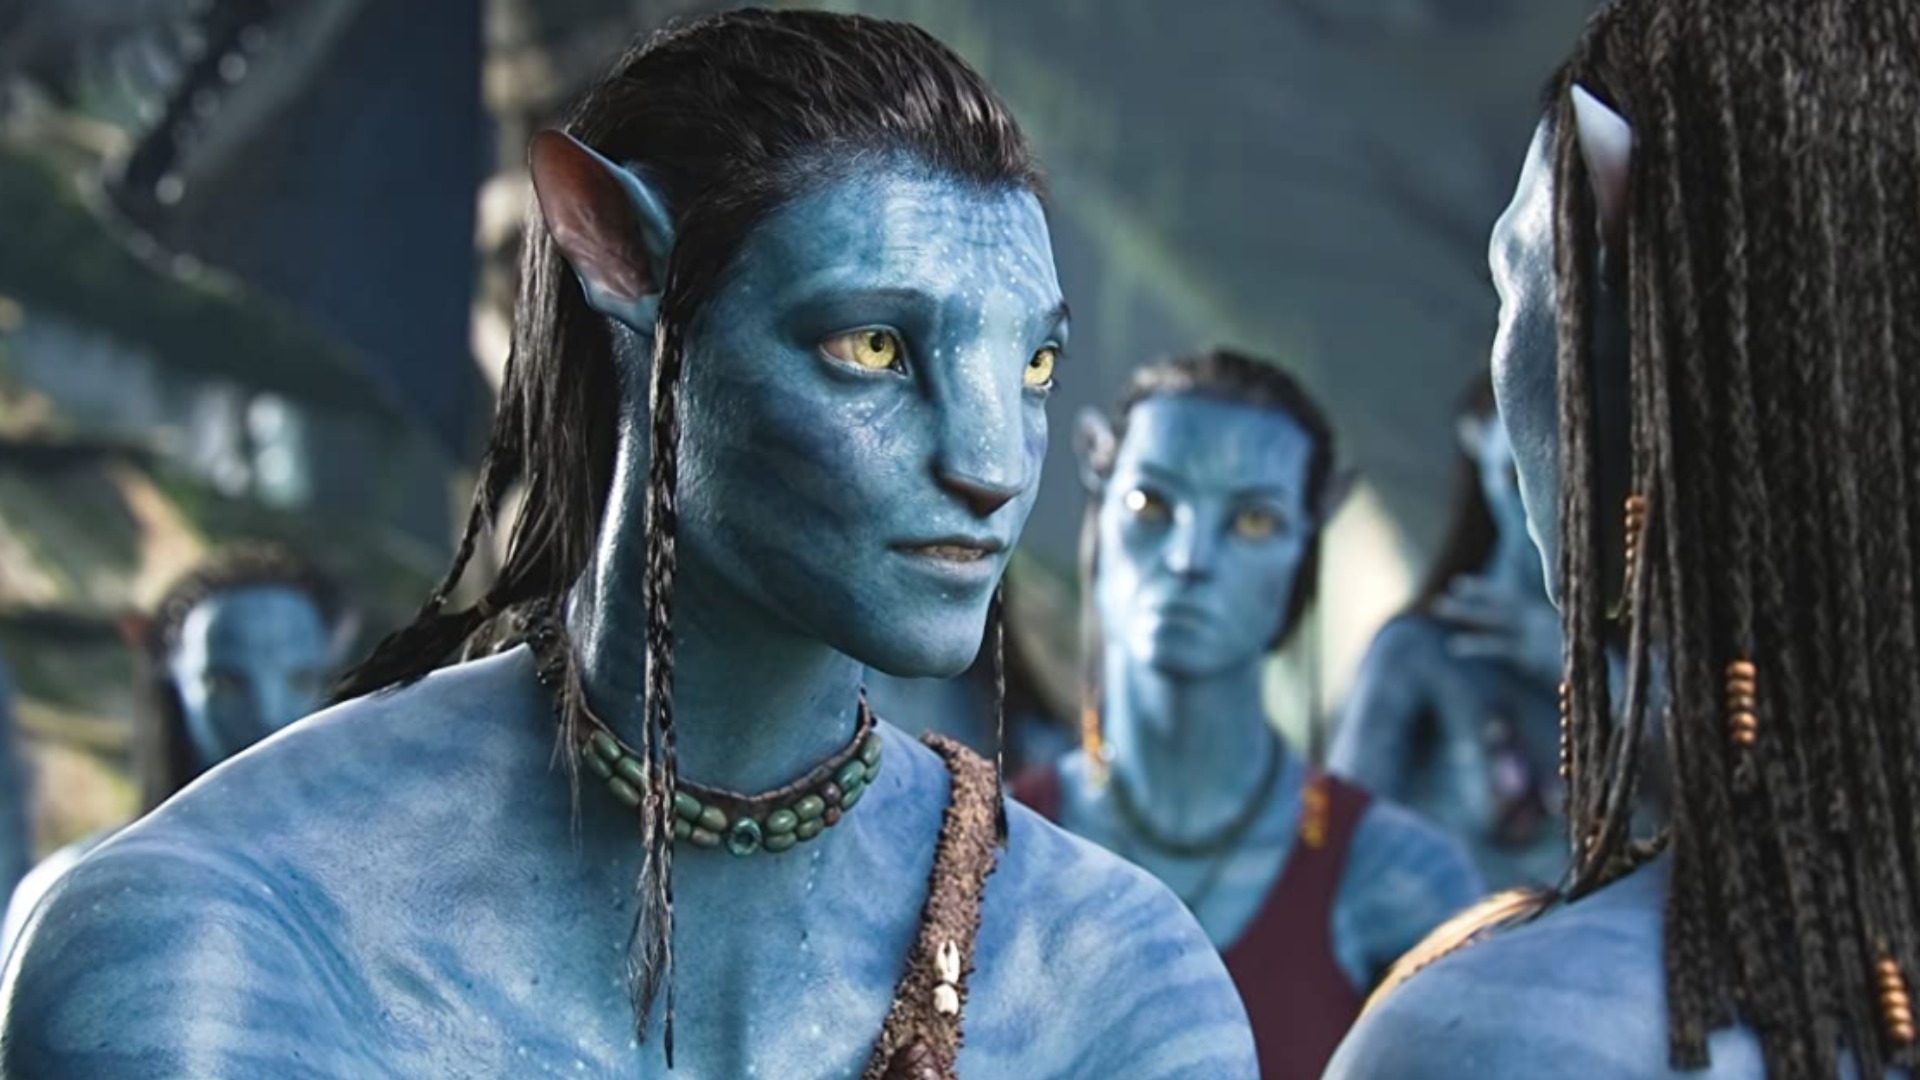 Avatar 2 trailer revealed at Cinema Con as James Cameron’s sequel gets official title